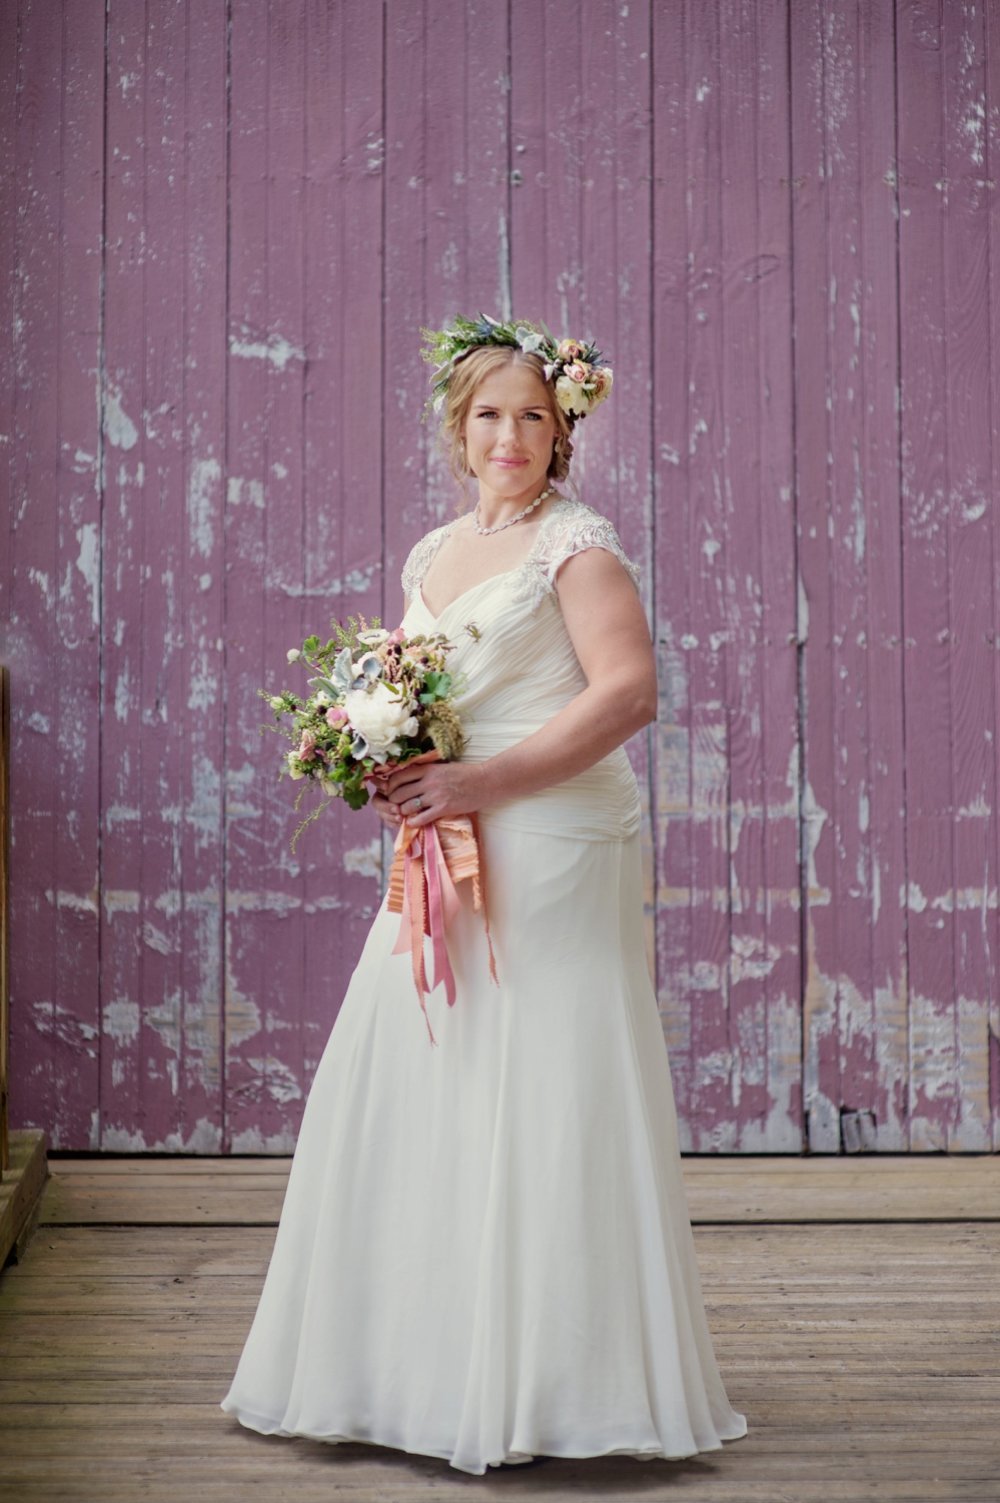 Rustic same-sex wedding at The Barn at Walnut Hill in Maine